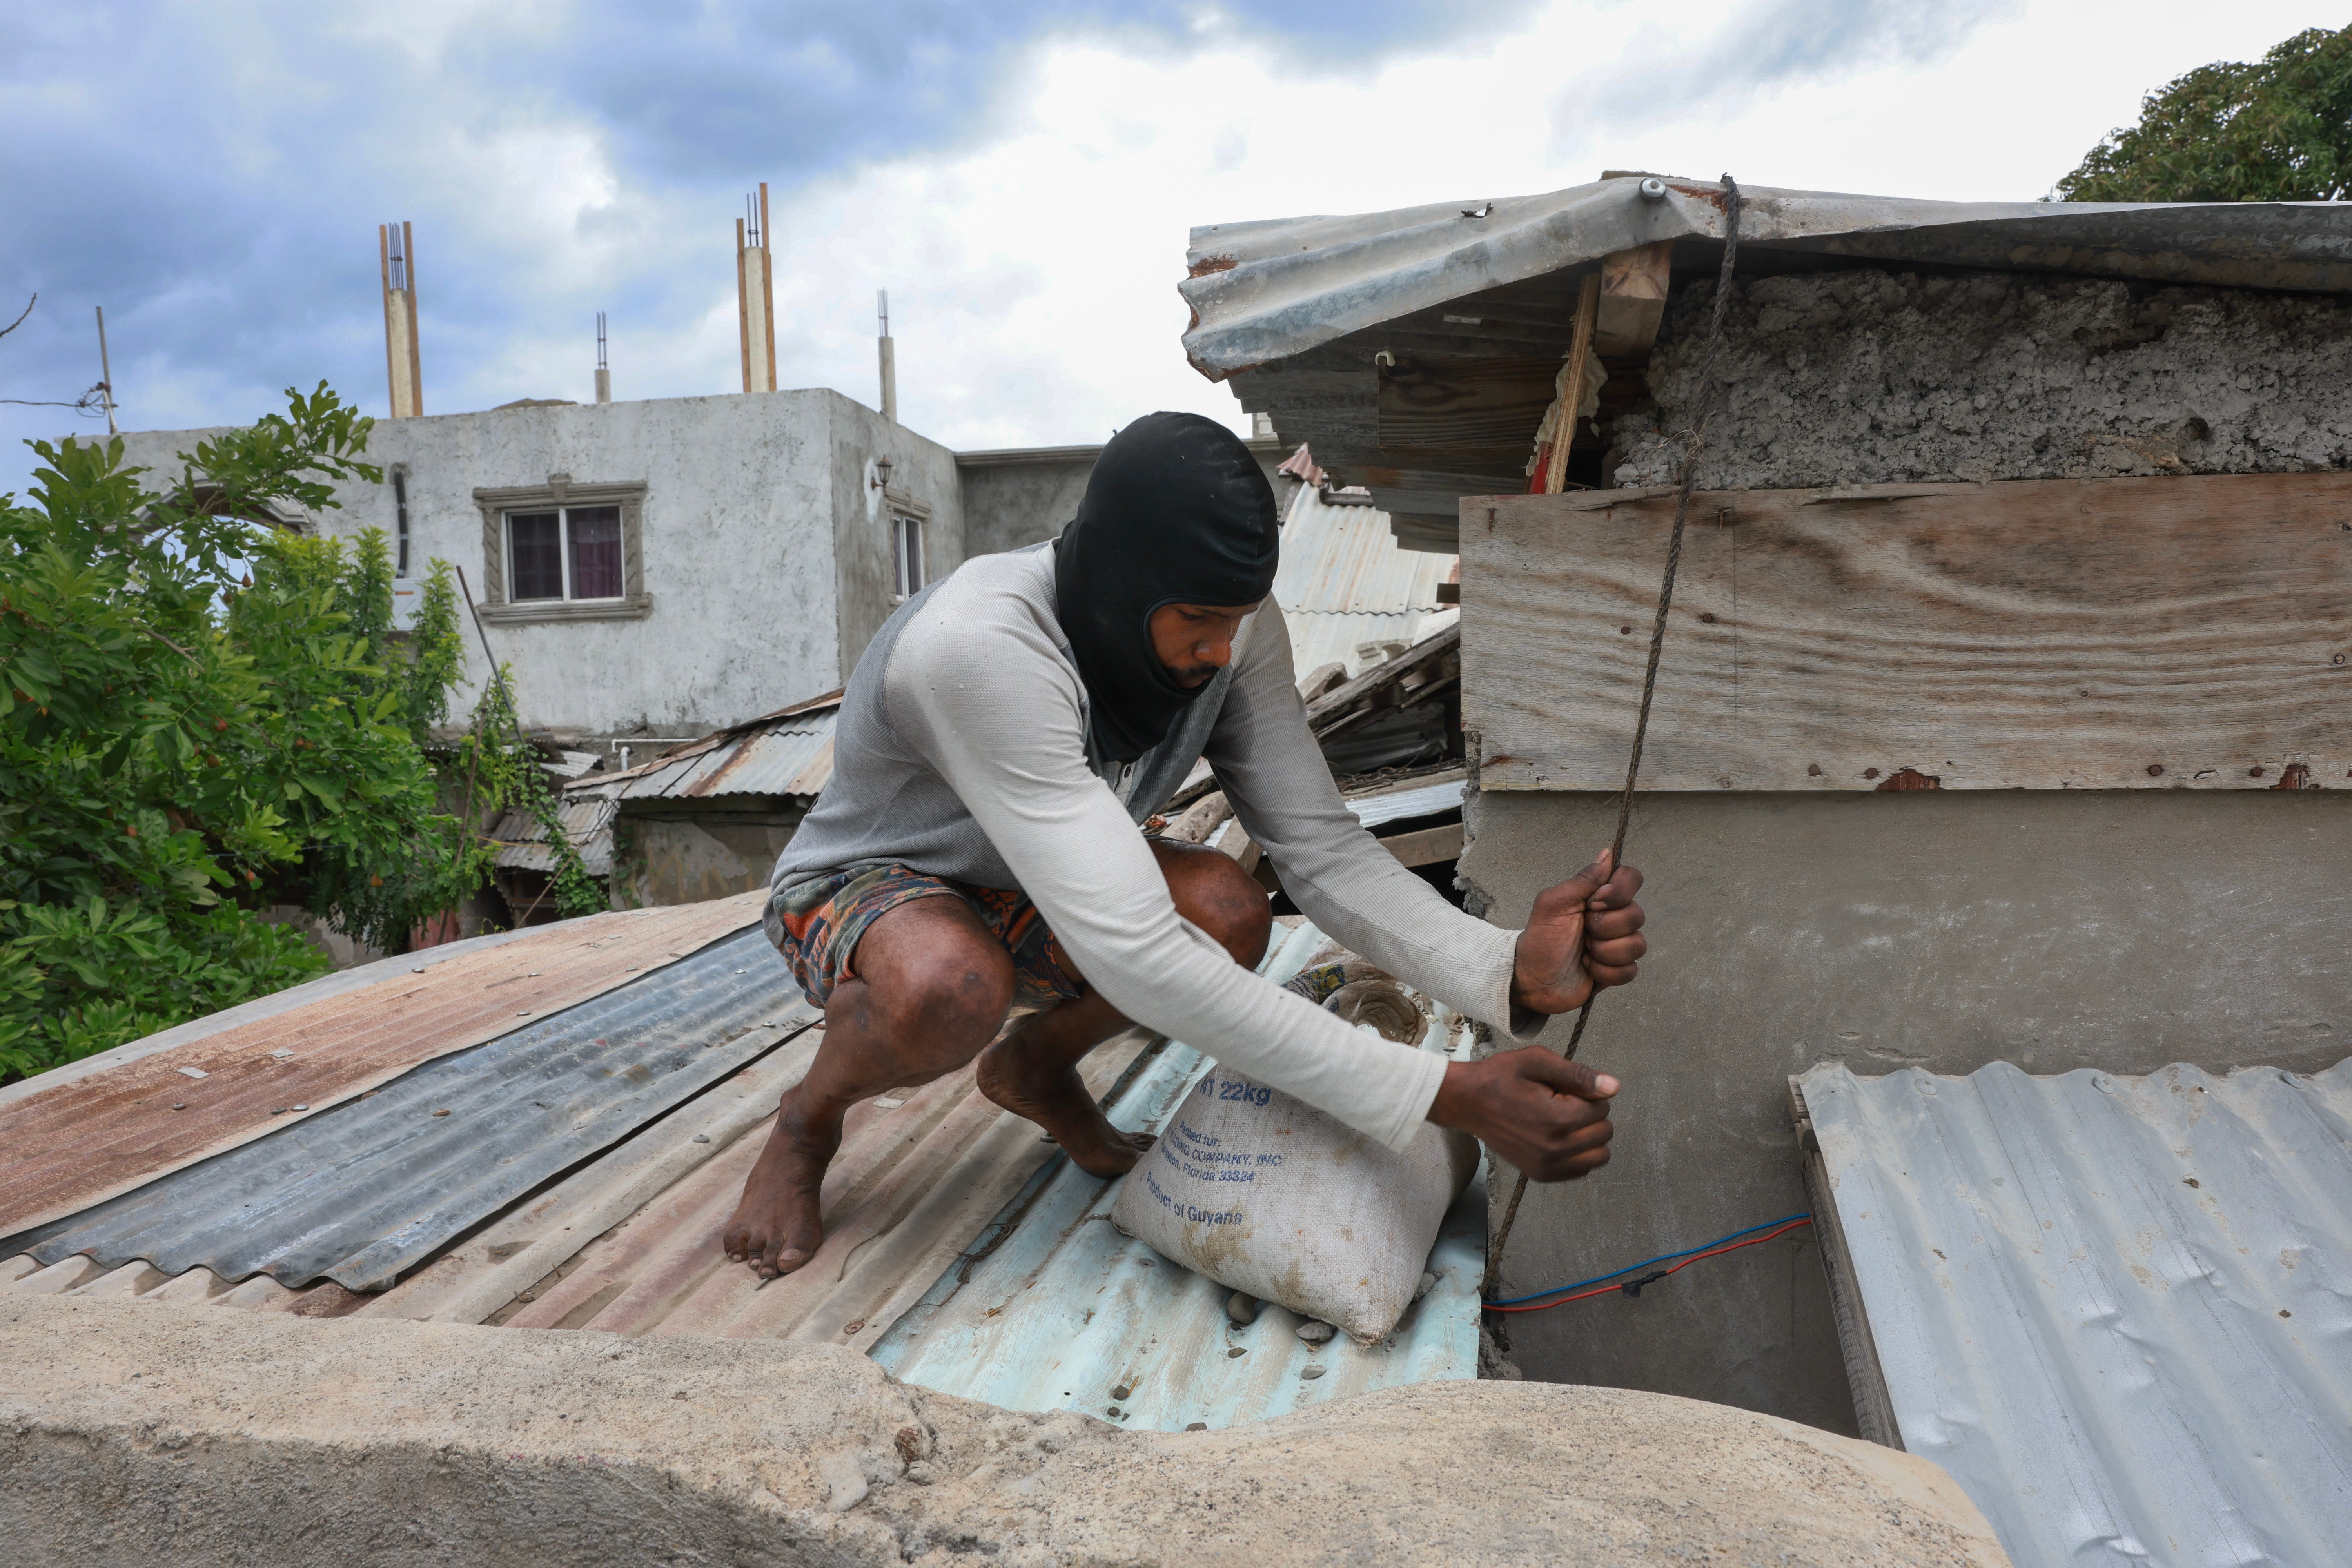 A person places sandbags on a rooftop in Kingston, Jamaica on Wednesday as Hurricane Beryl approaches